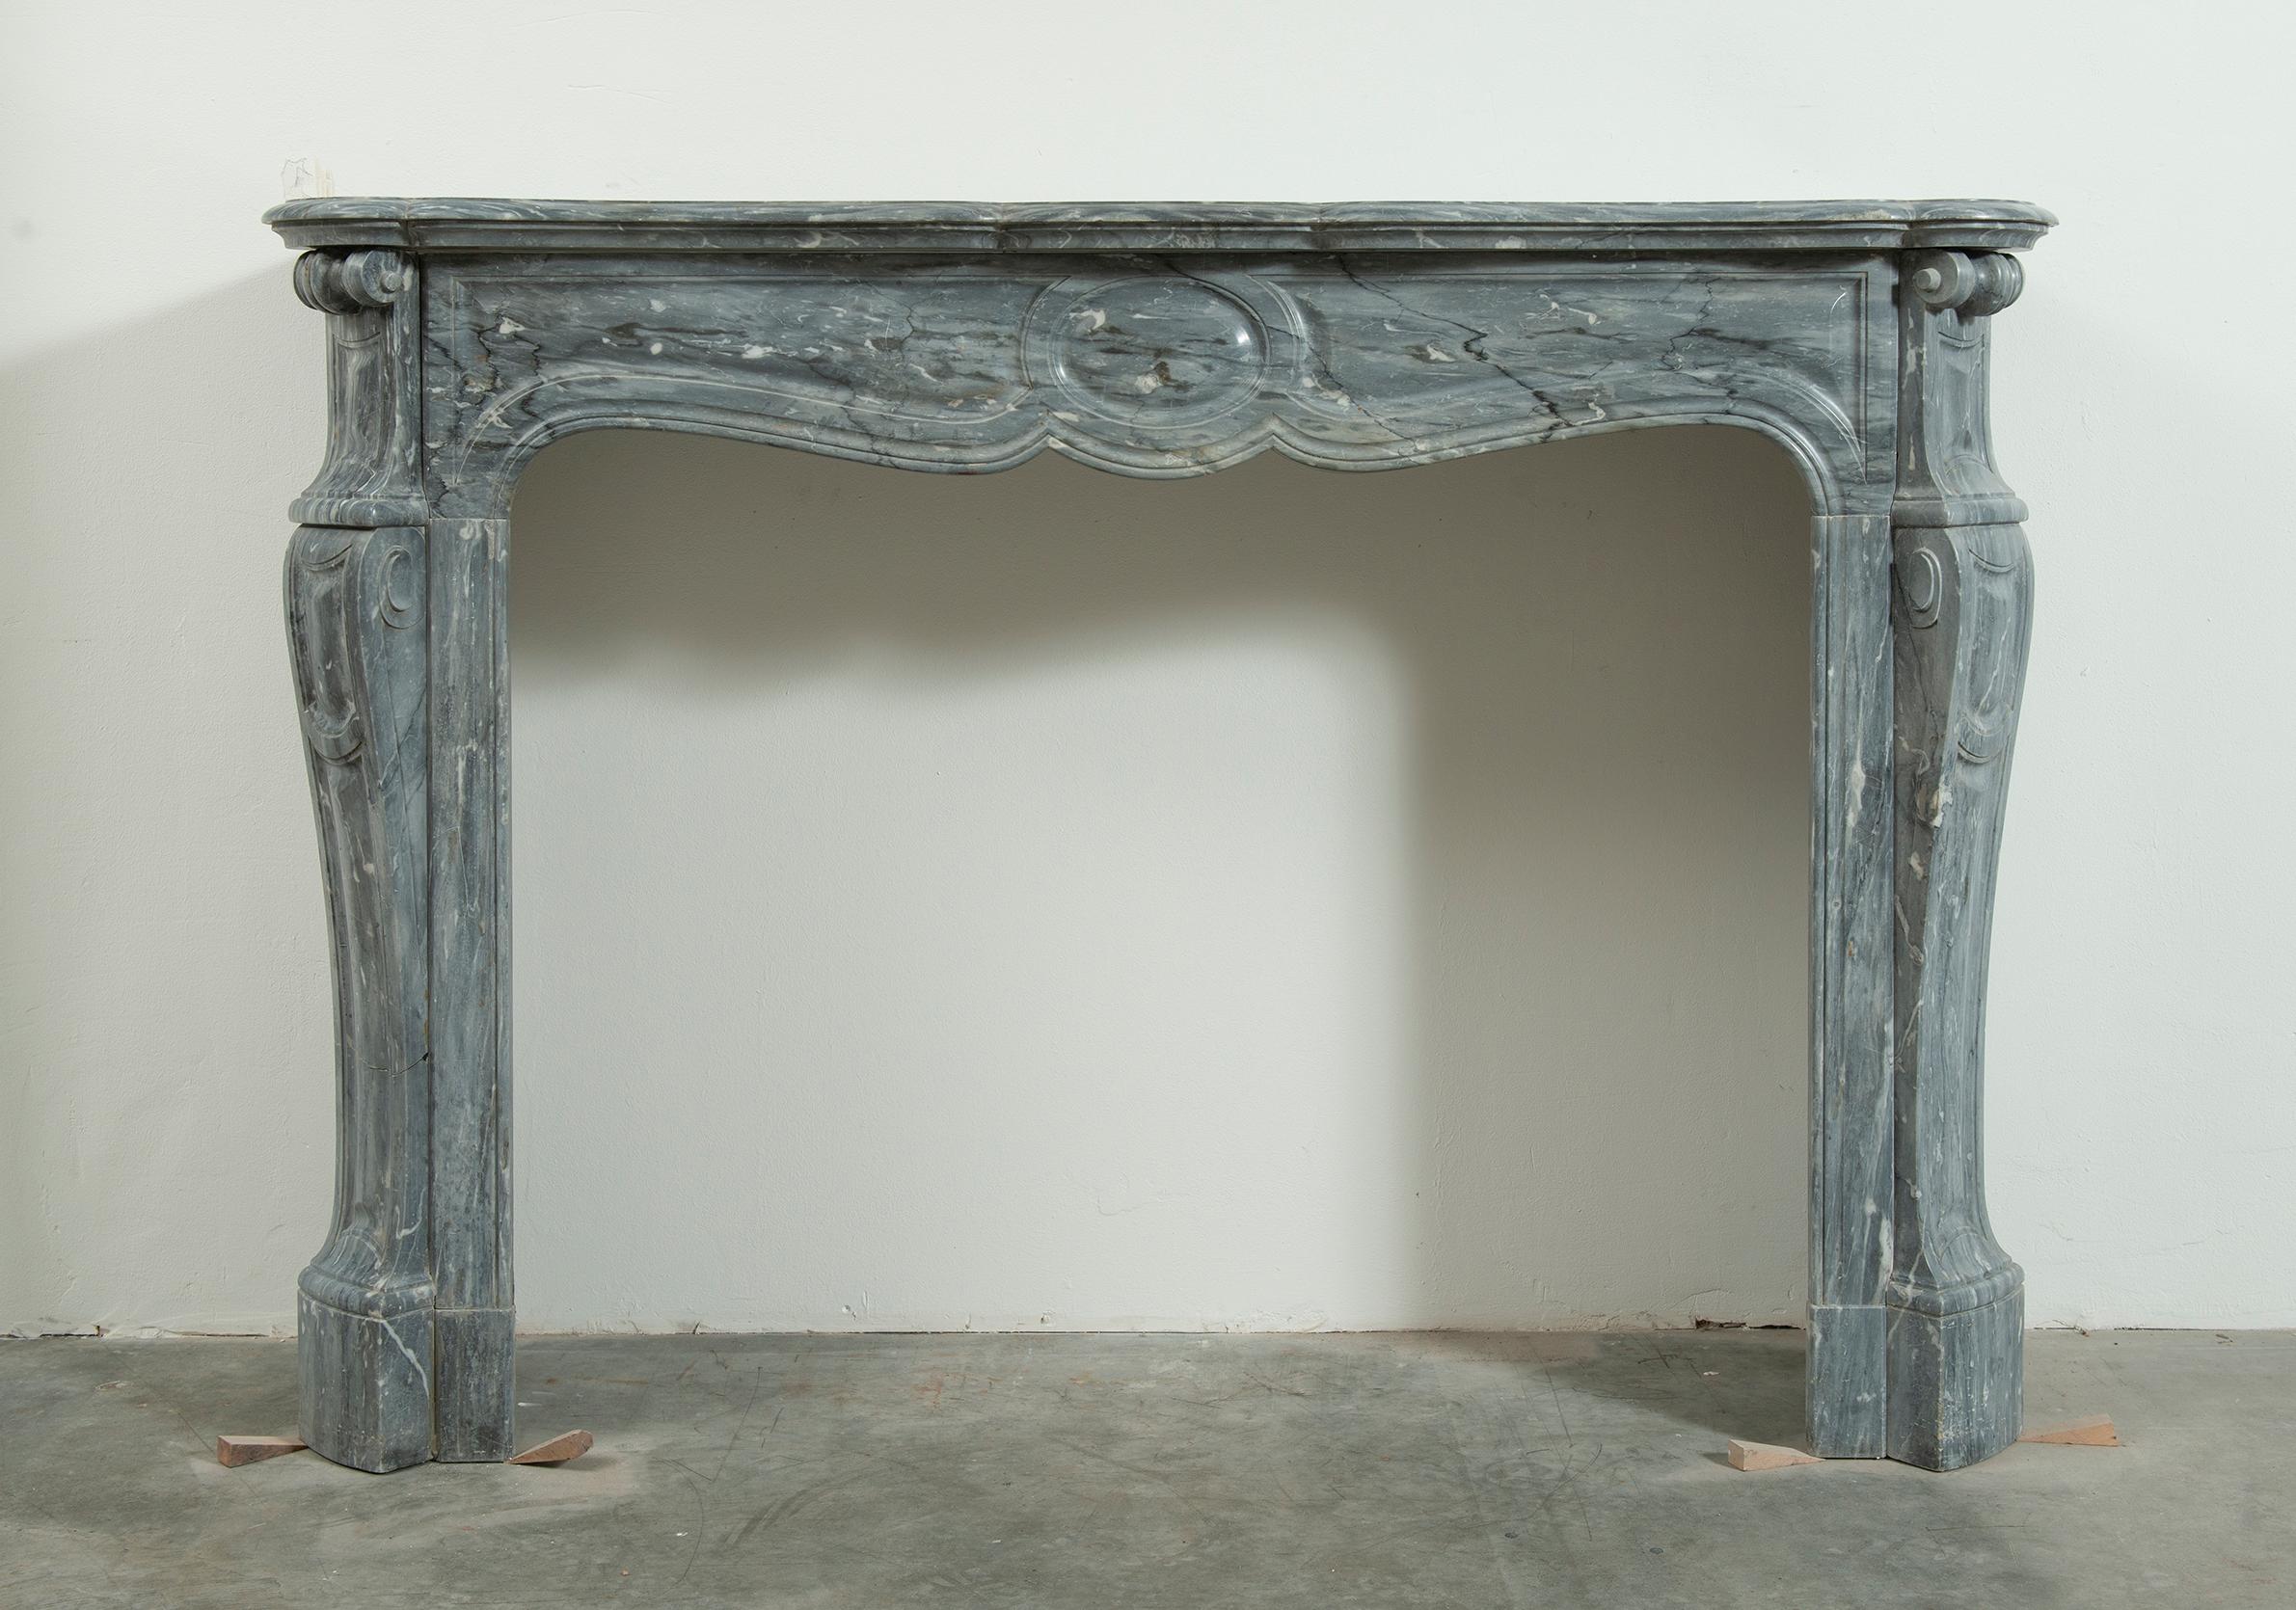 Beautiful French grey marble Louis XV style fireplace mantel.

The serpentine breakfront shelf rests above a paneled freeze centered by a large and crisp saucer echoed on the endblocks which sit above angled, paneled jambs supported on sturdy